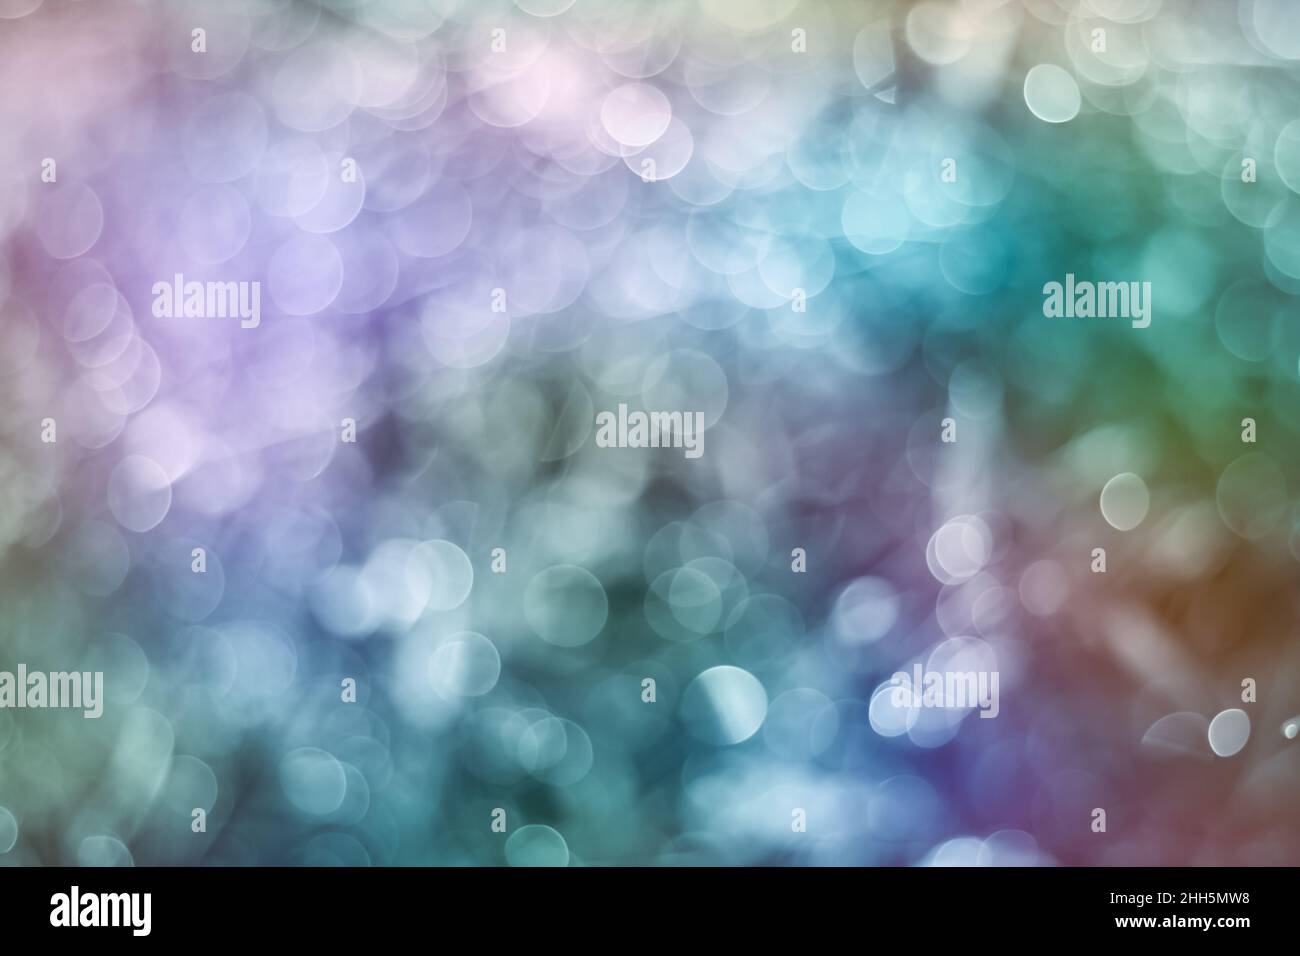 Twinkling lights blurred bokeh would make a great background. Abstract and vivid color style. Stock Photo